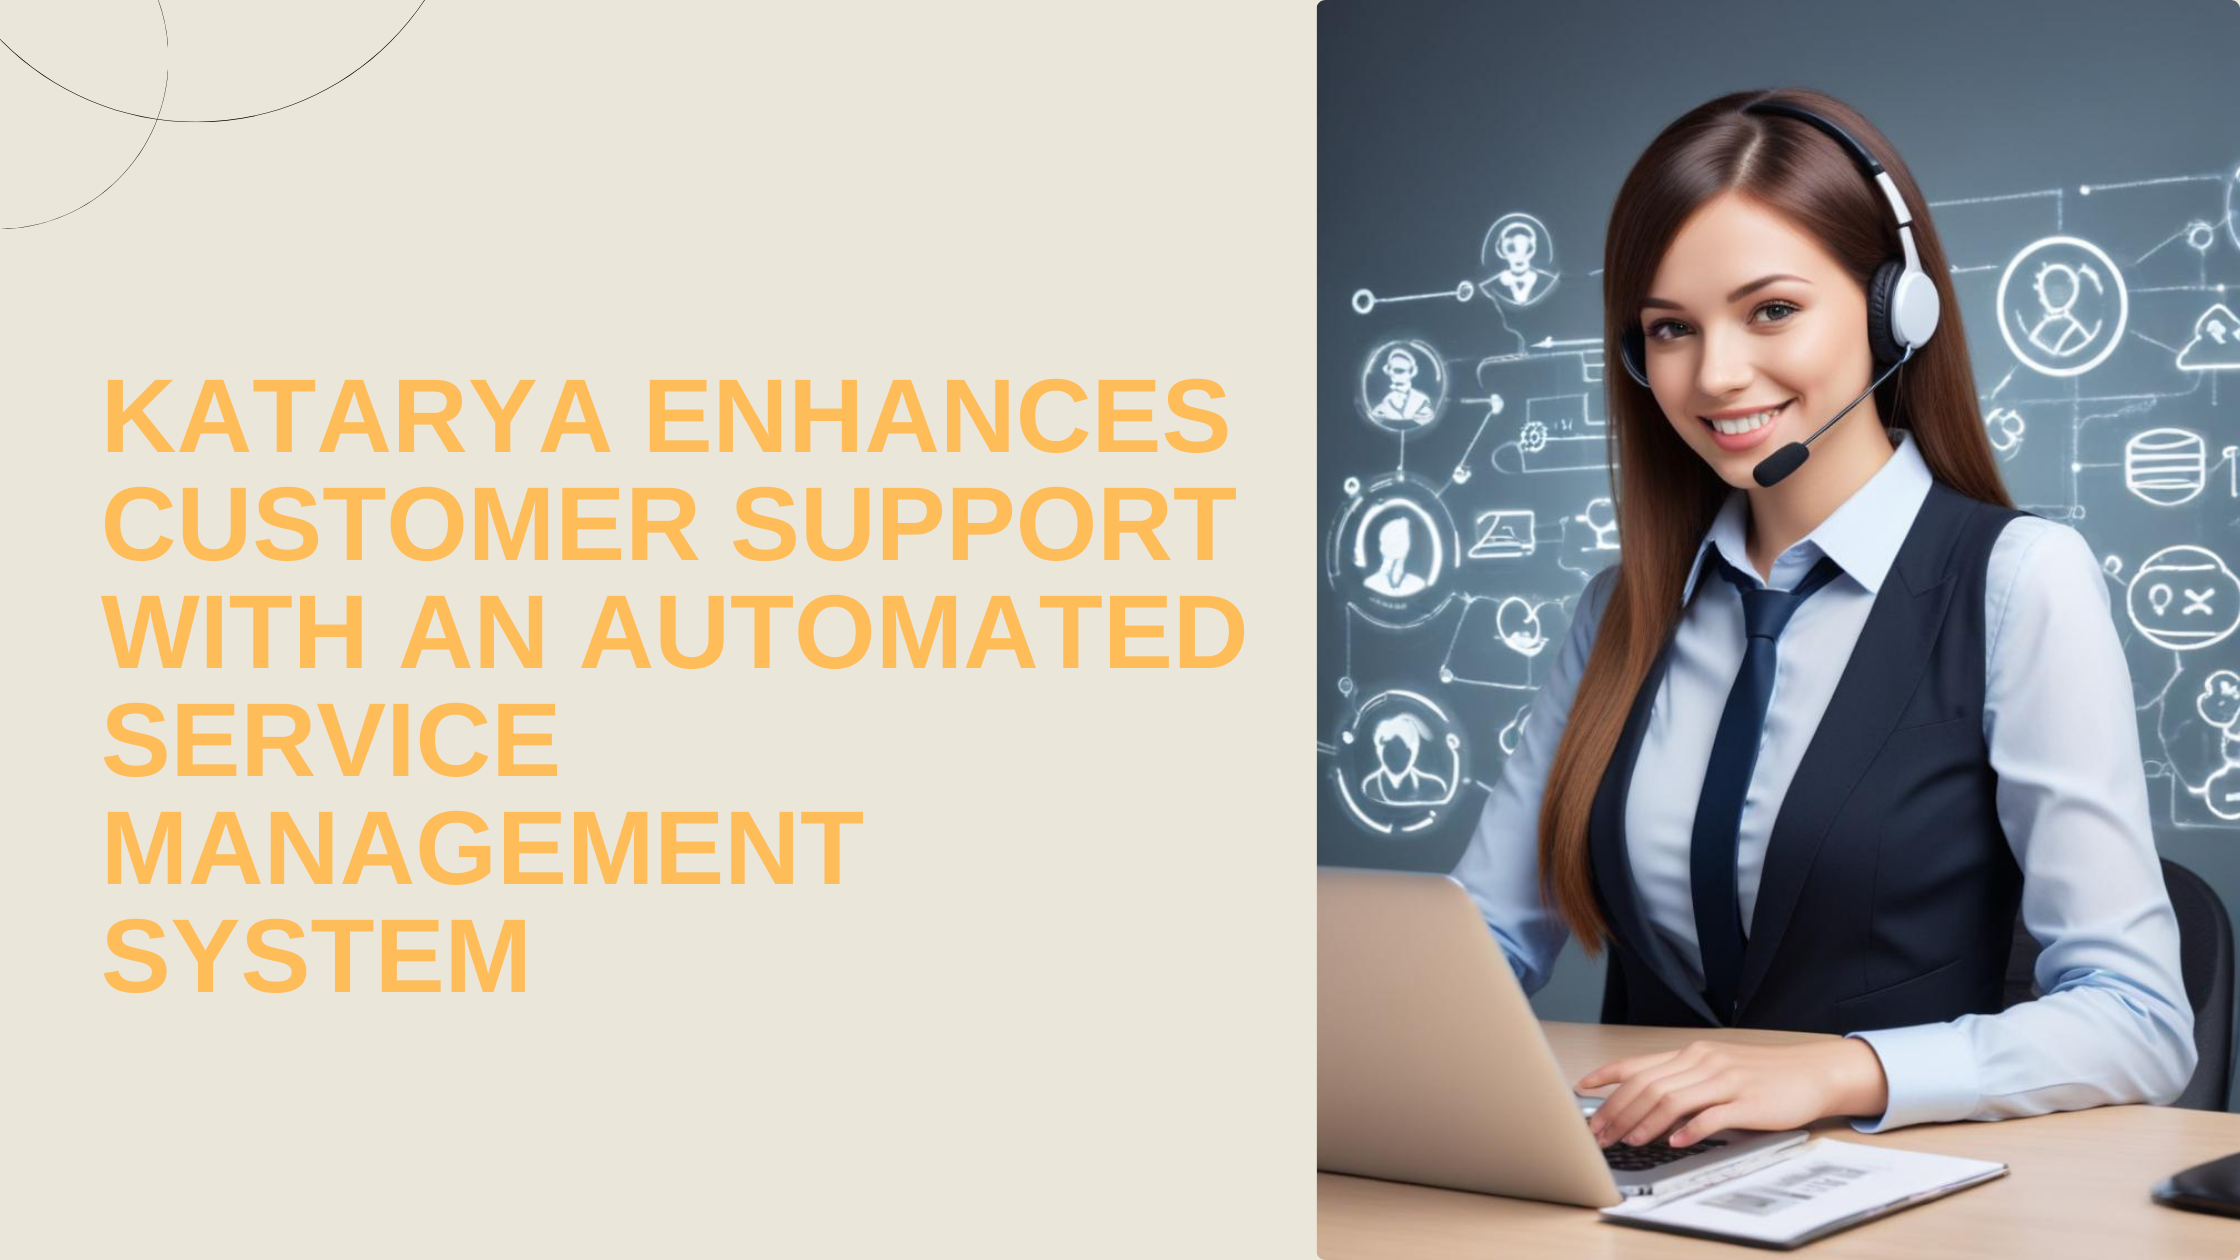 Katarya enhances customer support with an automated service management system